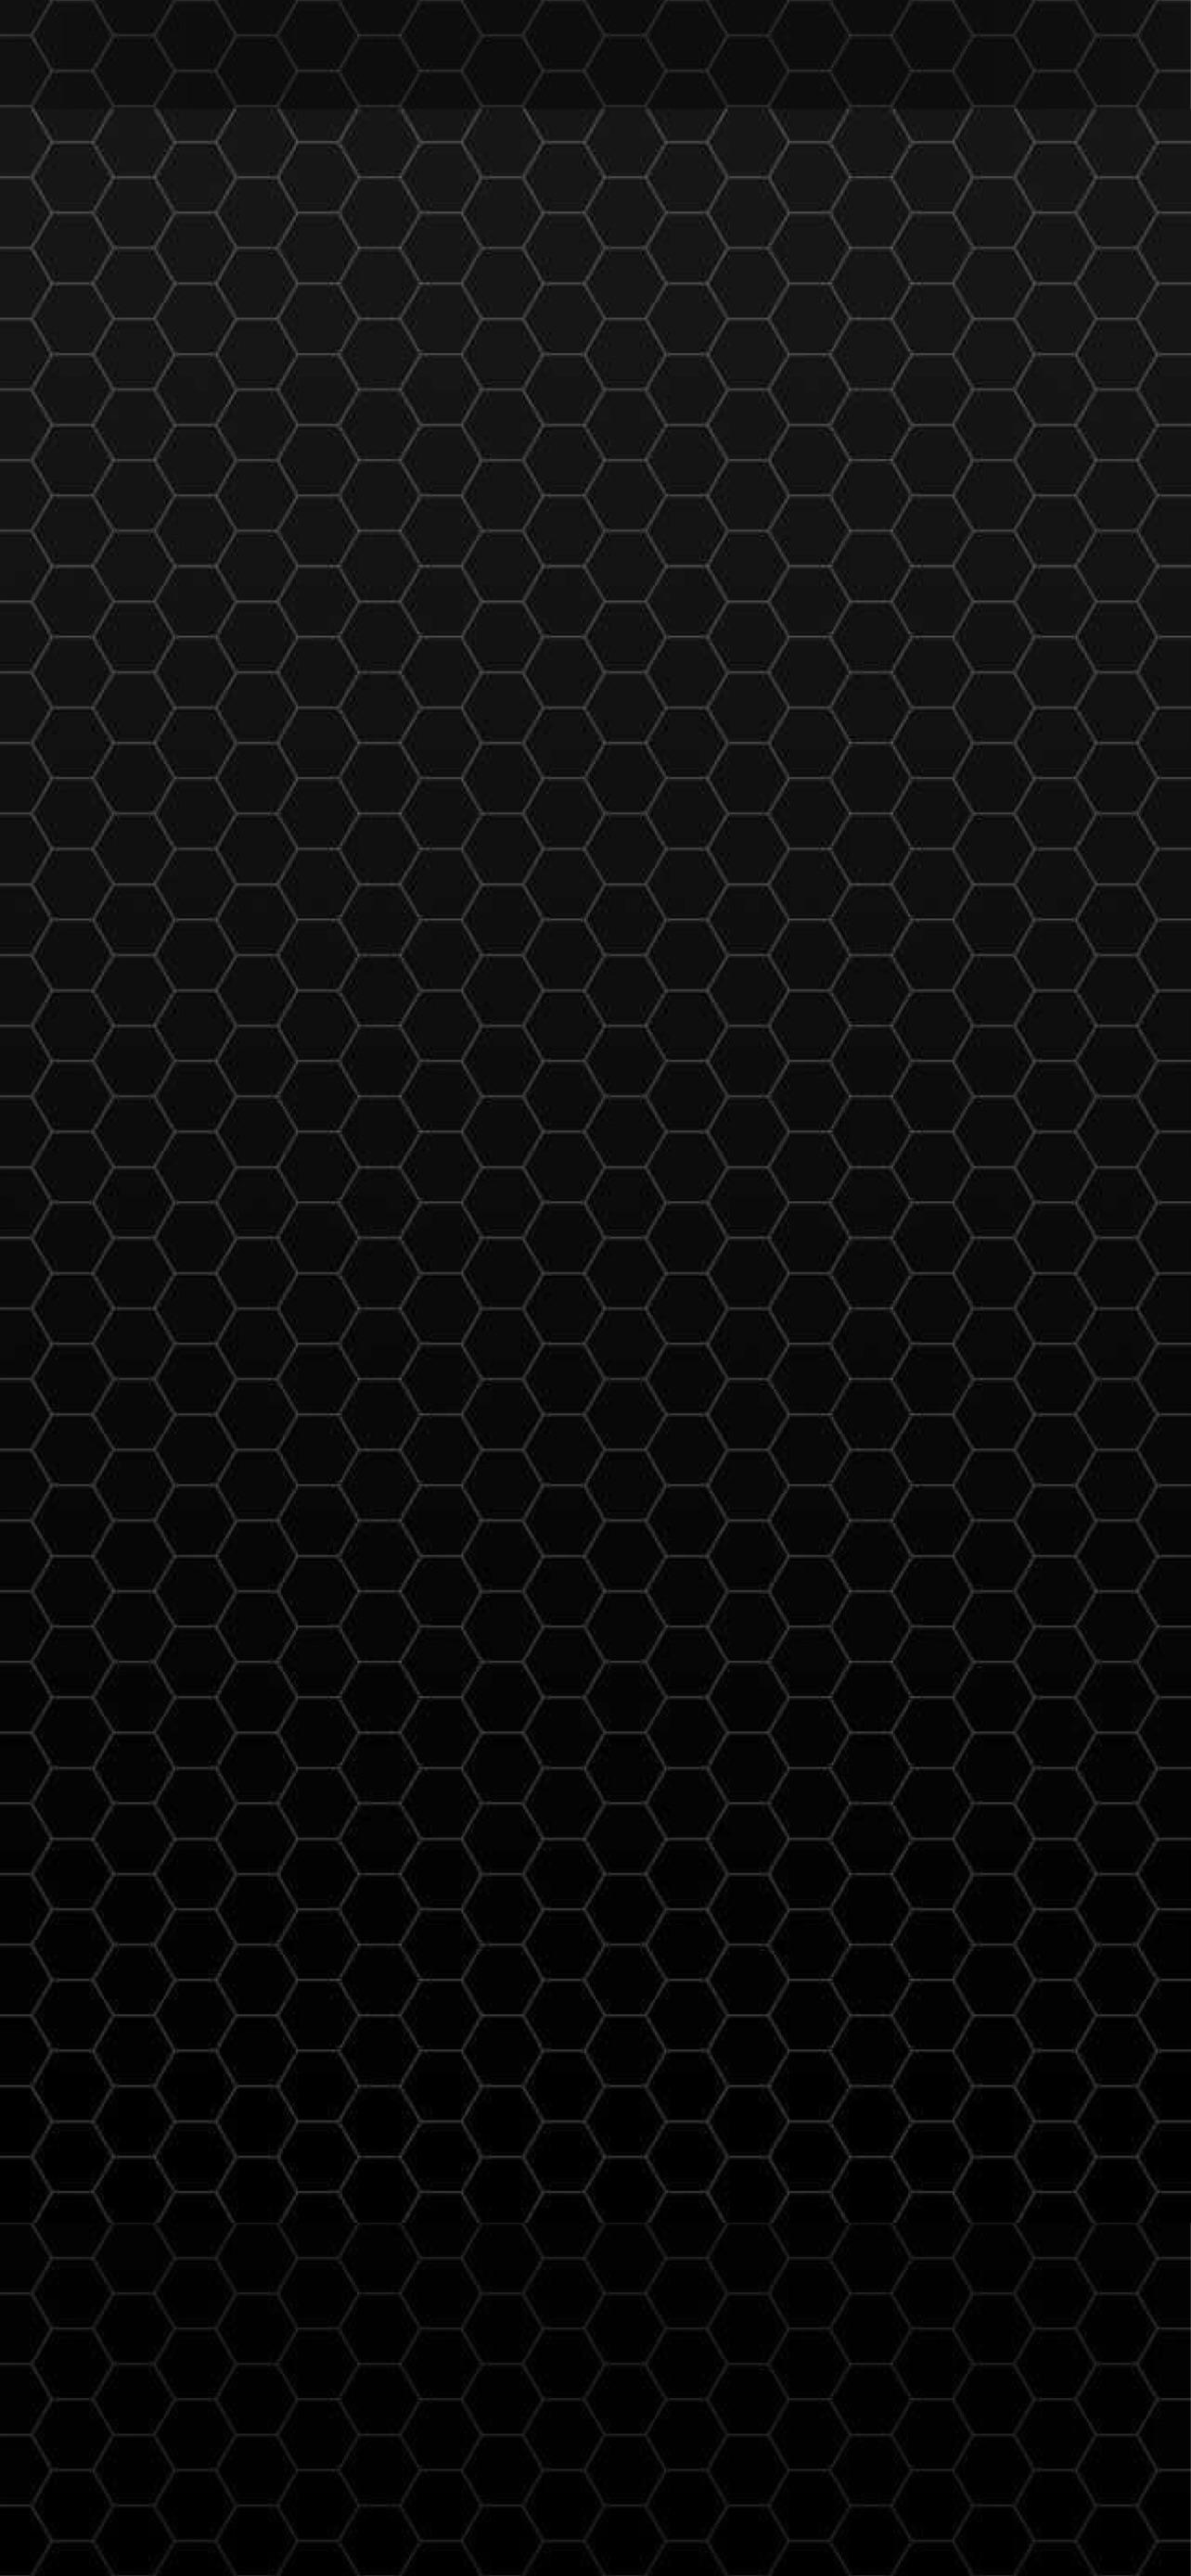 17 Beautiful black wallpapers for iPhone Free download  iGeeksBlog